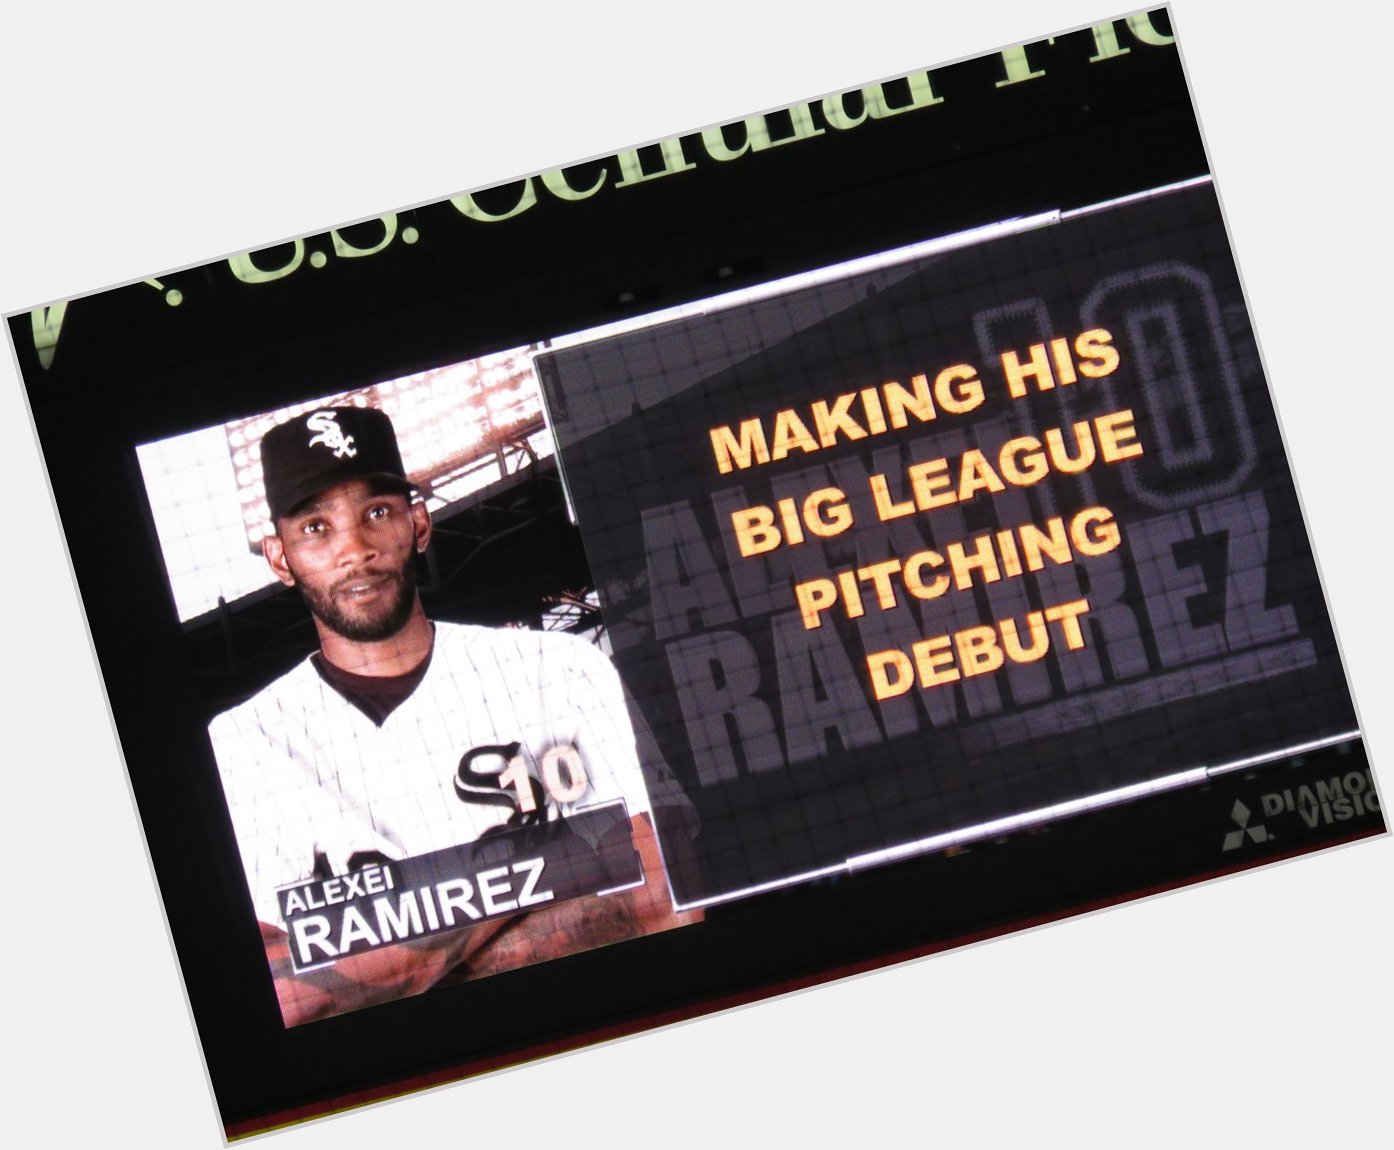 Happy birthday to Alexei Ramirez!

I was there for history - his pitching debut! 